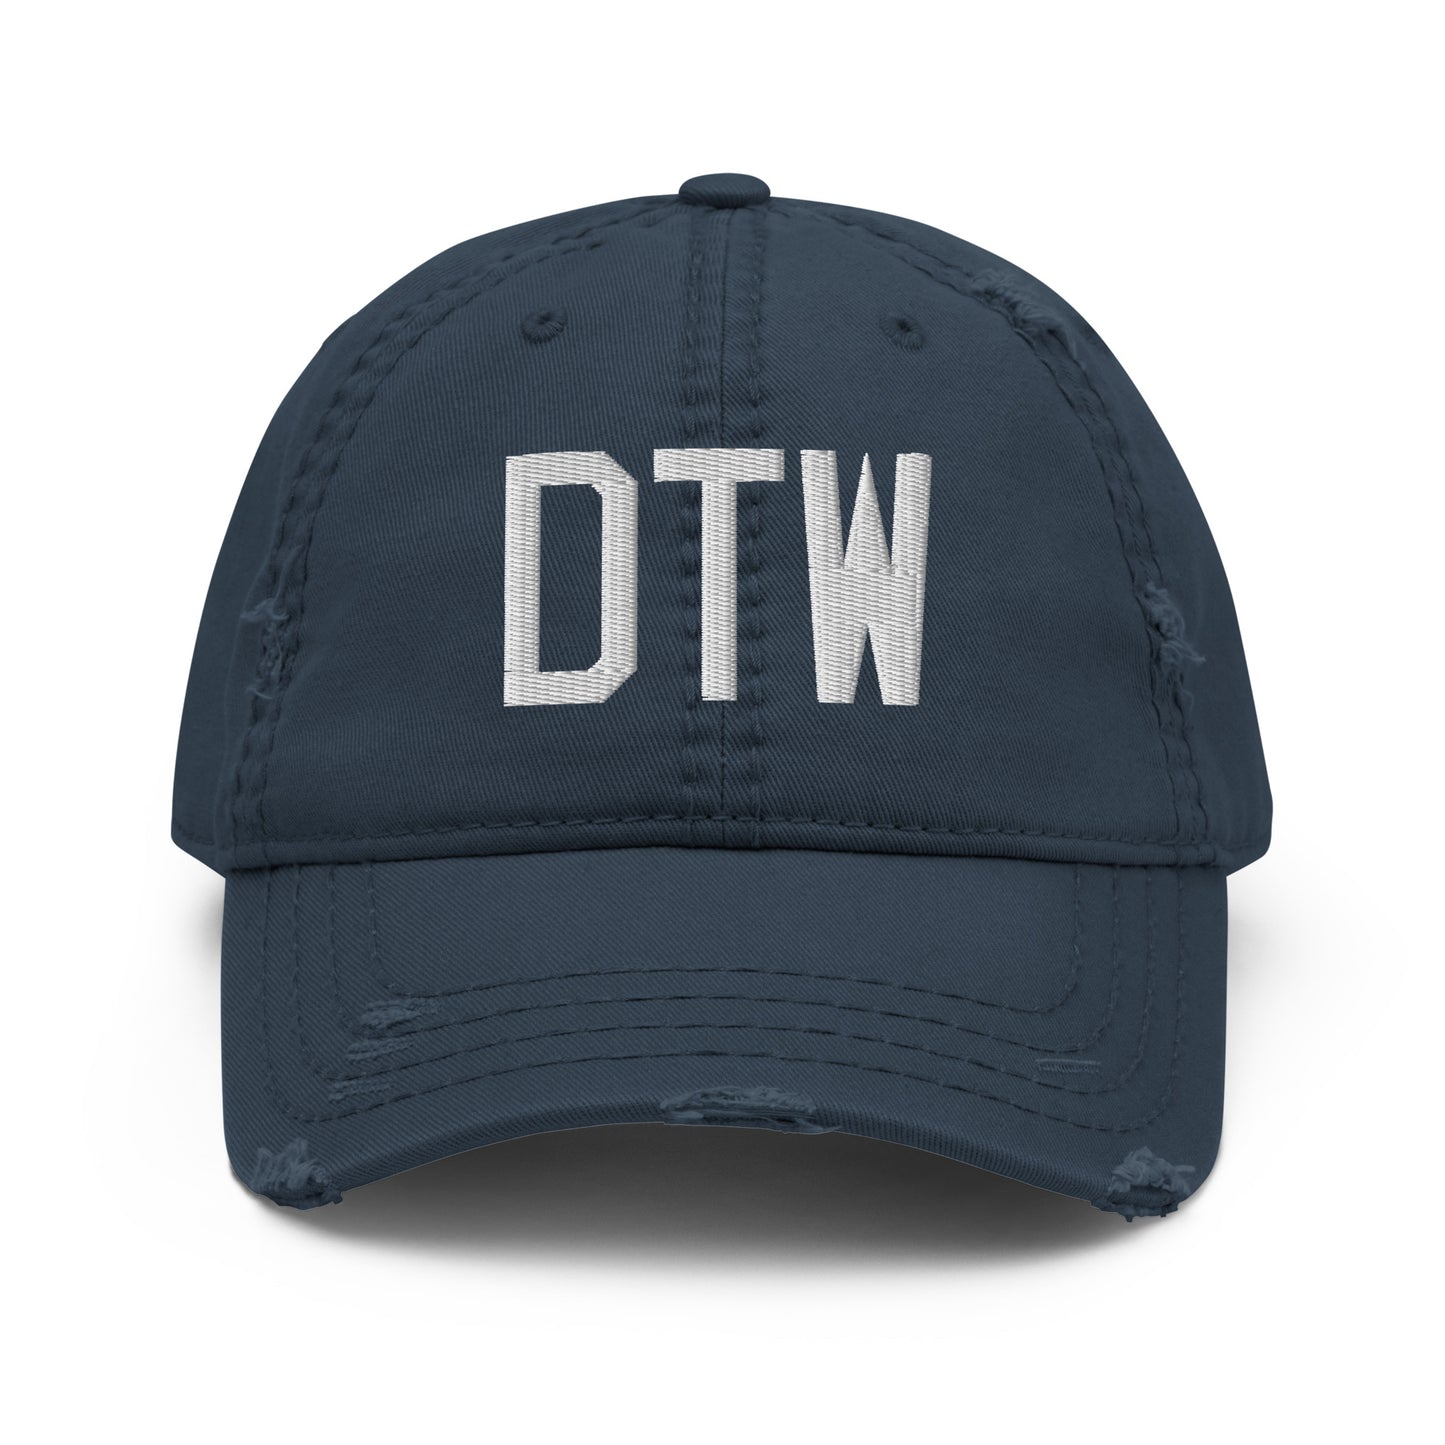 Airport Code Distressed Hat - White • DTW Detroit • YHM Designs - Image 13